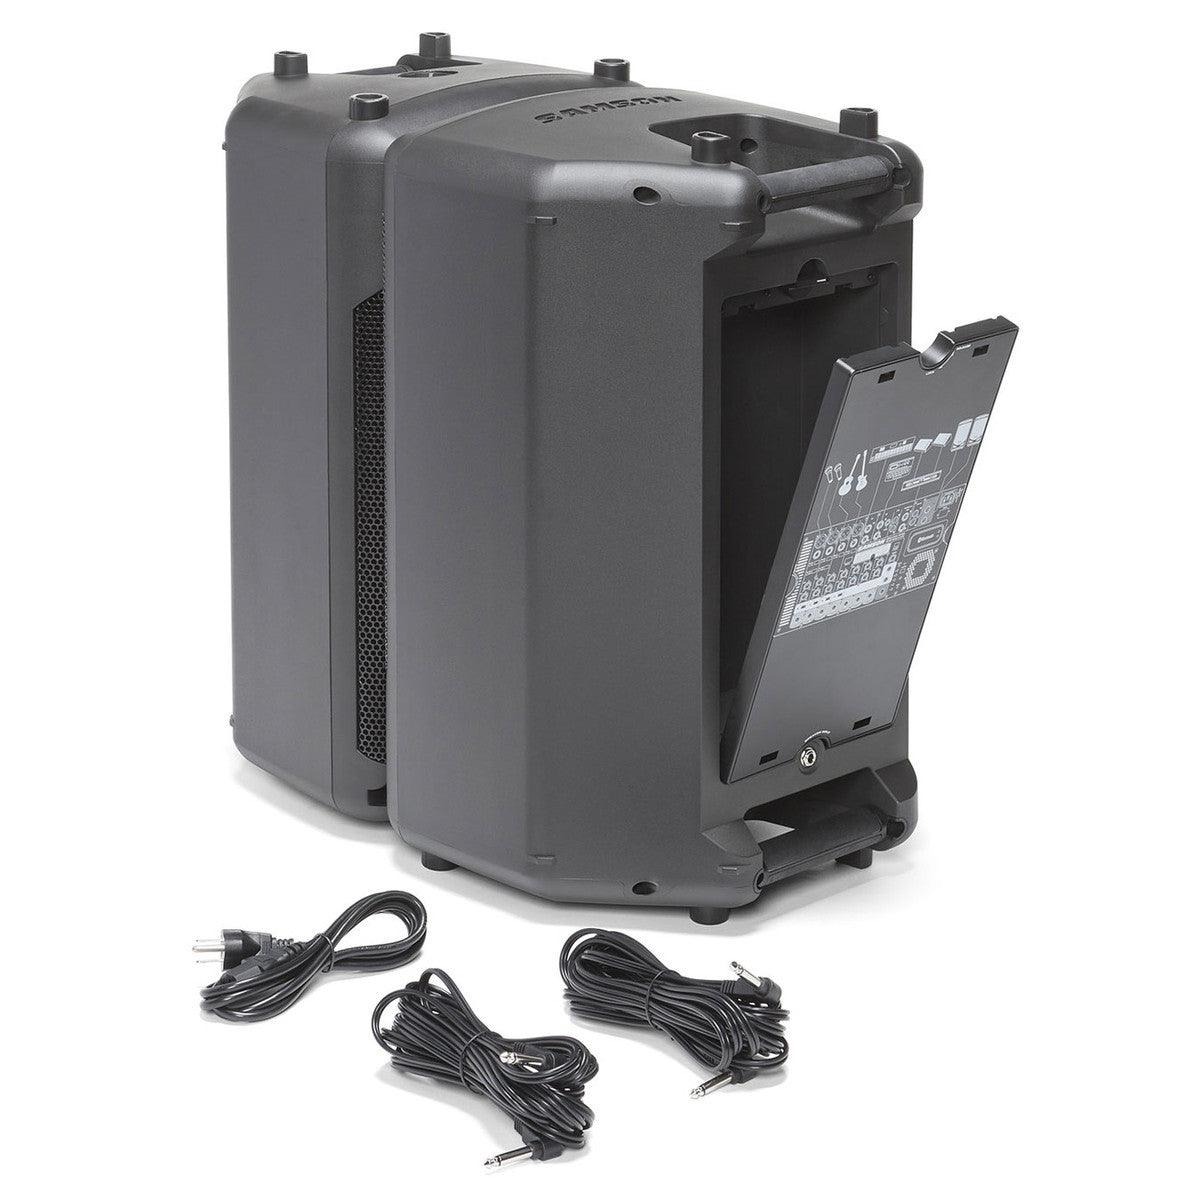 Samson Expedition XP1000 Portable PA system - DY Pro Audio